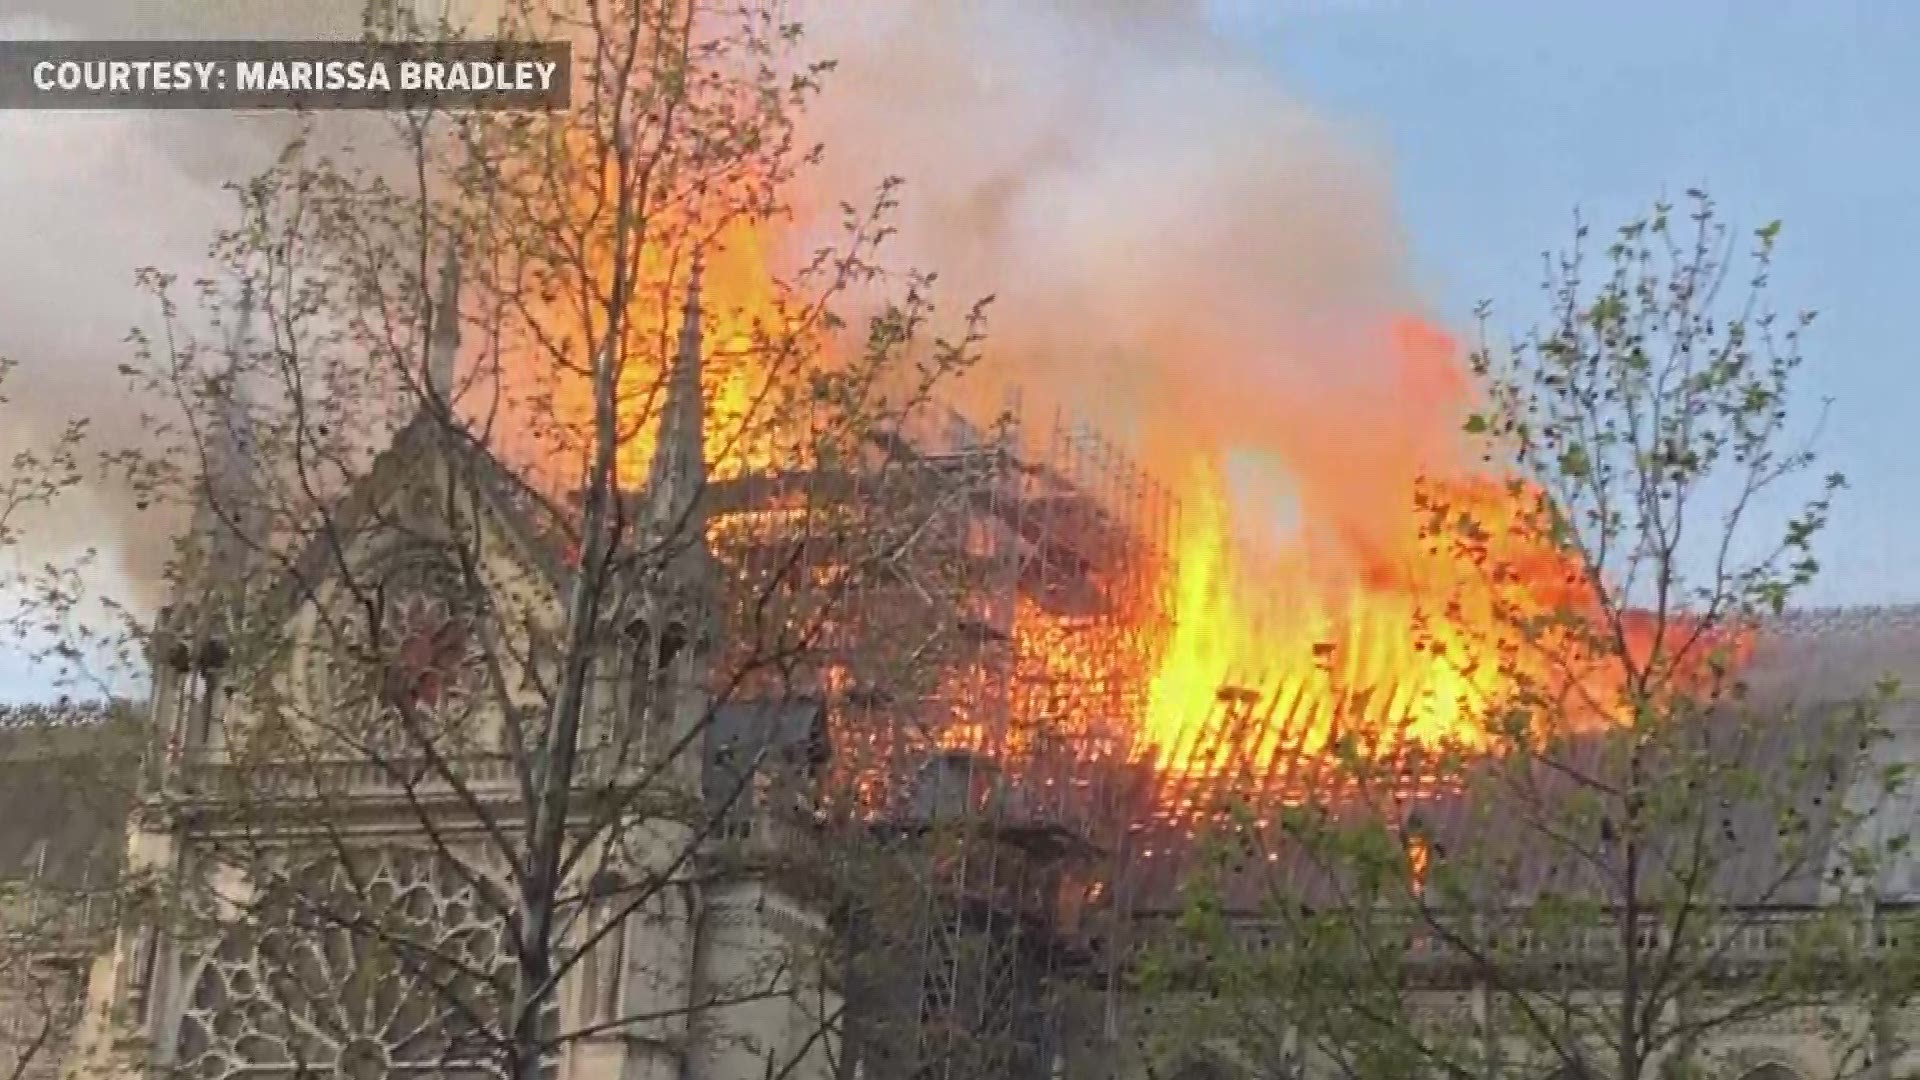 Raw footage of the heartbreaking fire at Notre Dame Cathedral in Paris, sent to KARE 11 by Marissa Bradley. More details on the fire: https://kare11.tv/2UIeSbL